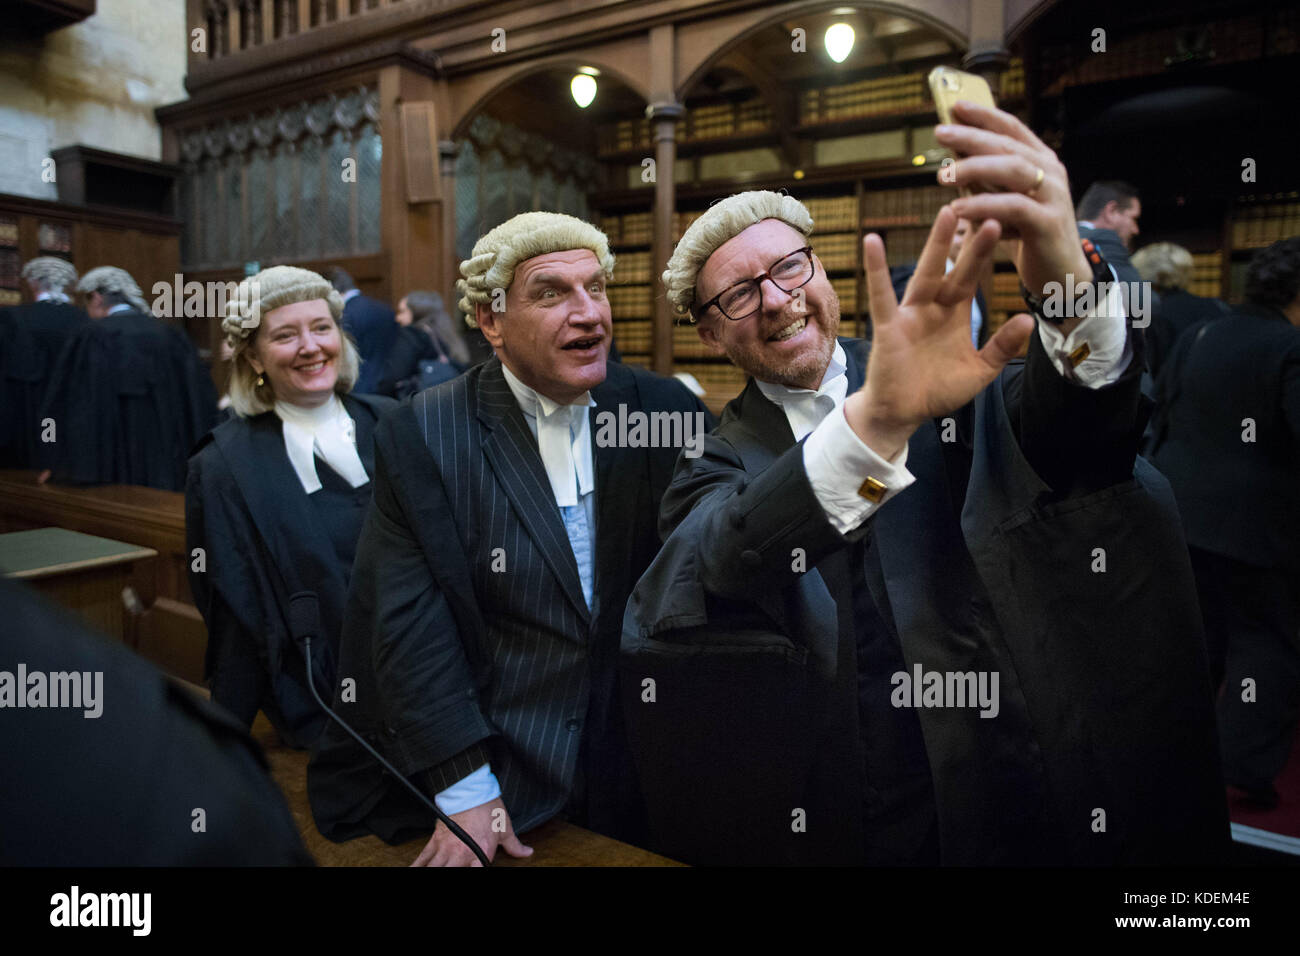 High Court judges attend a valediction for Mr Justice Bodey, one of the most senior family court judges in England and Wales, at the Royal Courts of Justice in London. Stock Photo